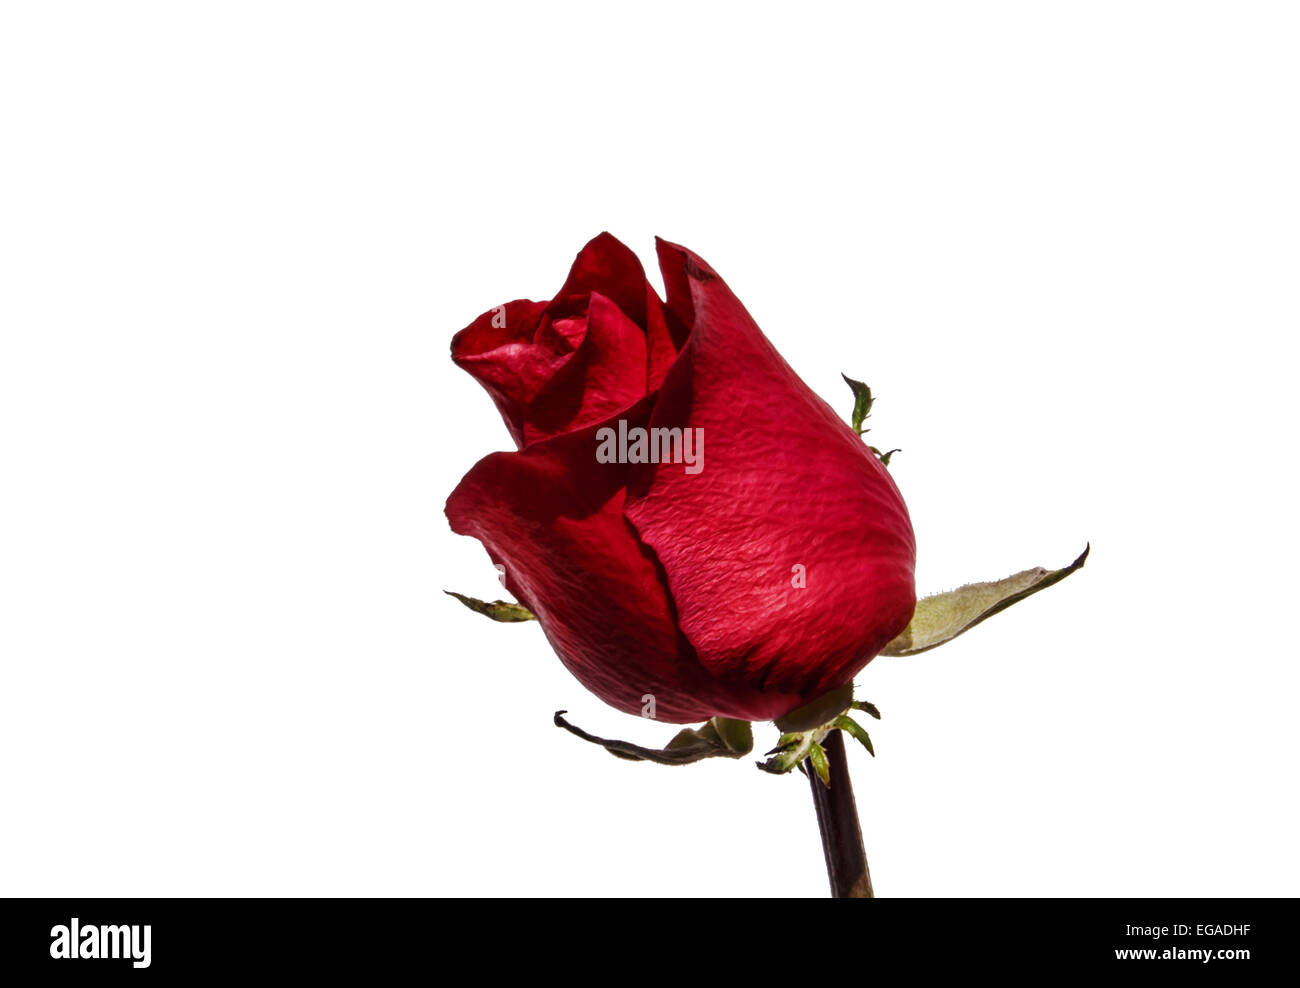 Red rose on a white background alone. Stock Photo